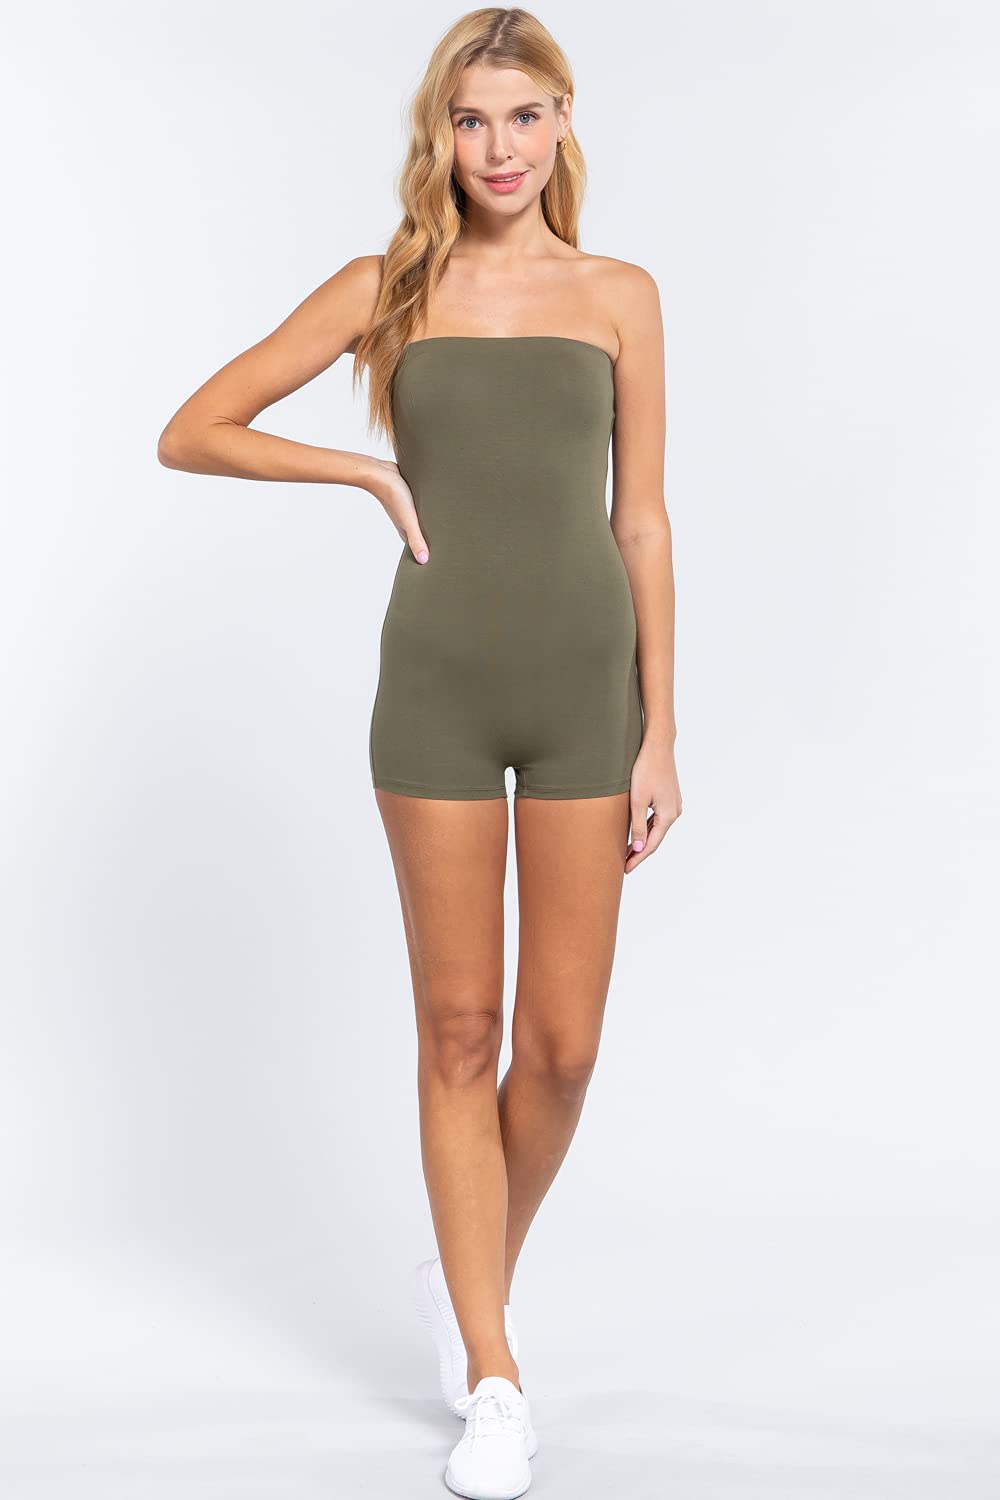 Blended with 92% Cotton, 8% Spandex Super soft,stretchy and lightweight,  Classy high quality fabric, very soft to touch and wear. Jumpsuits and  rompers shorts for women makes you feel more confident. Romper